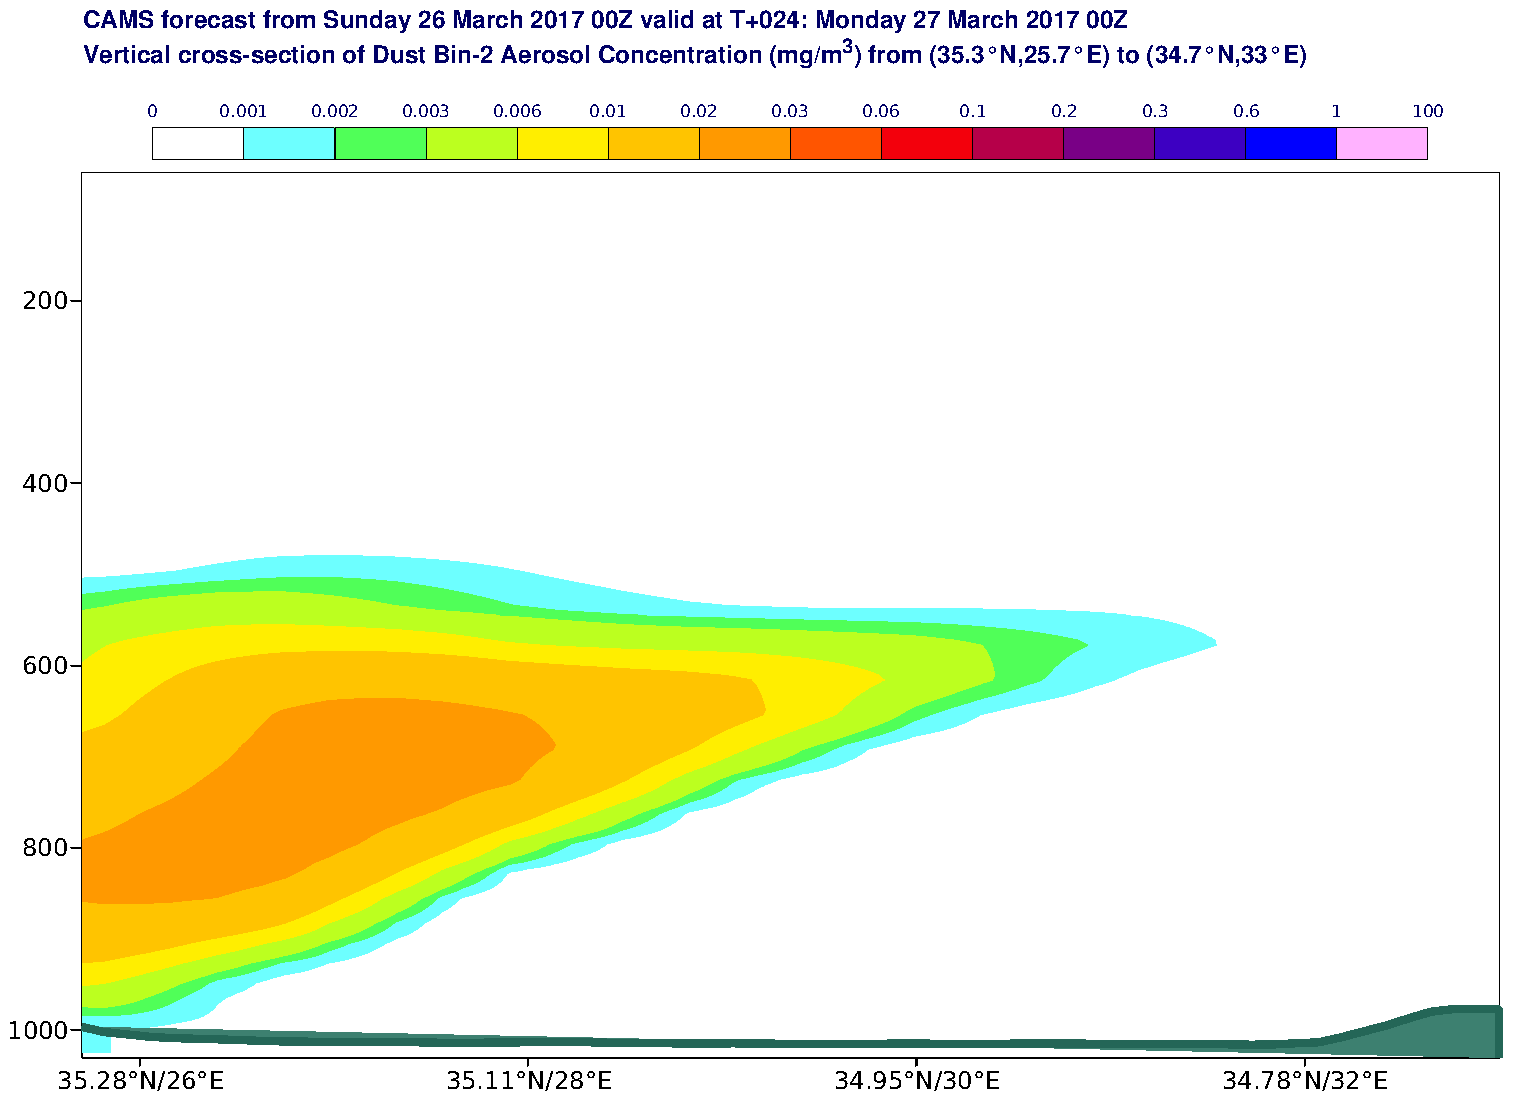 Vertical cross-section of Dust Bin-2 Aerosol Concentration (mg/m3) valid at T24 - 2017-03-27 00:00